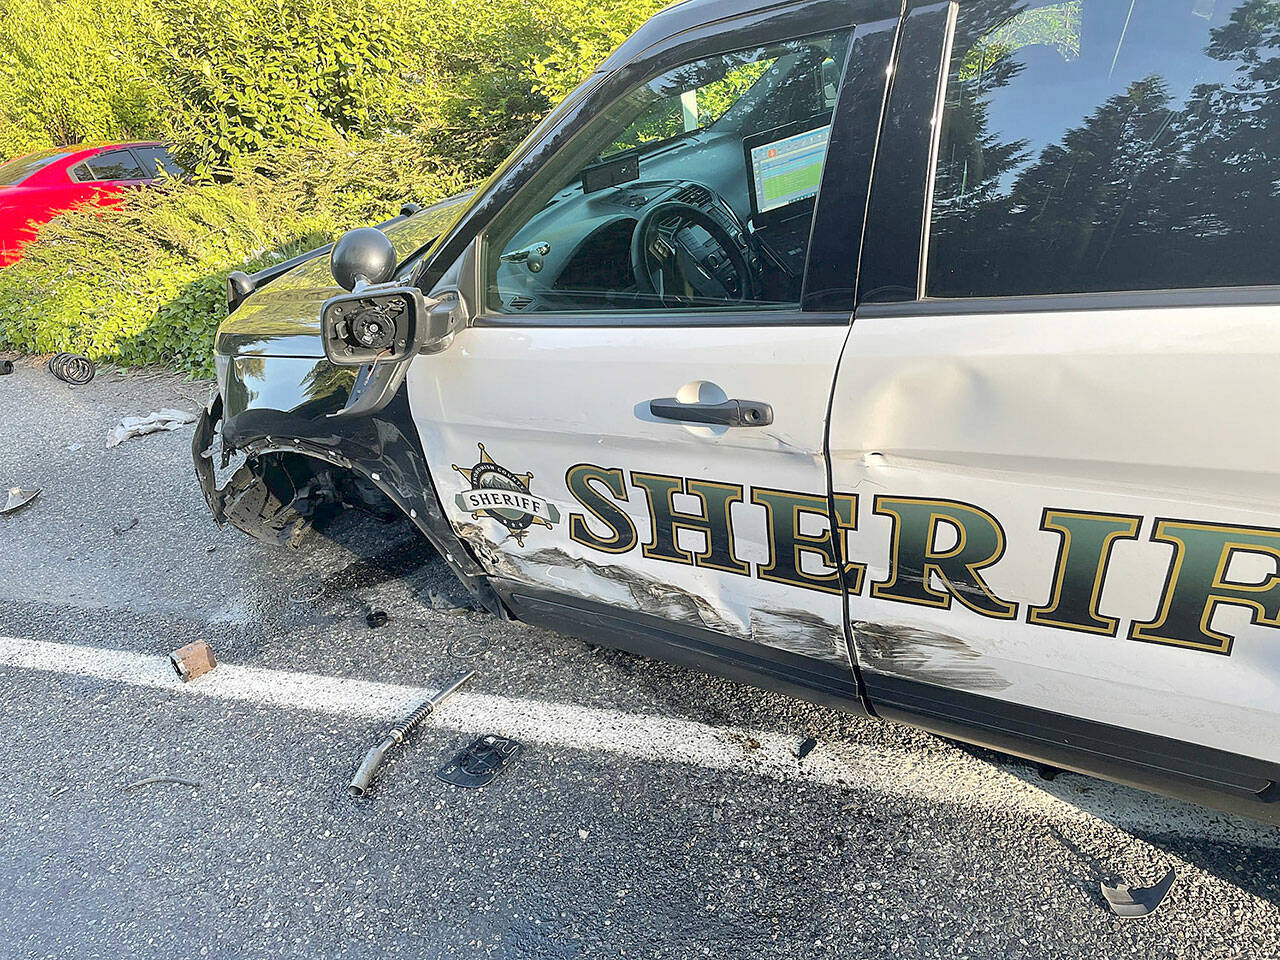 A driver in a Tesla reportedly using the vehicle’s Autopilot feature allegedly crashed into a Snohomish County Sheriff’s Office patrol SUV that was parked on the roadside in Lake Stevens in May 2021. There were no reported injuries. (Snohomish County Sheriff’s Office / Herald file)